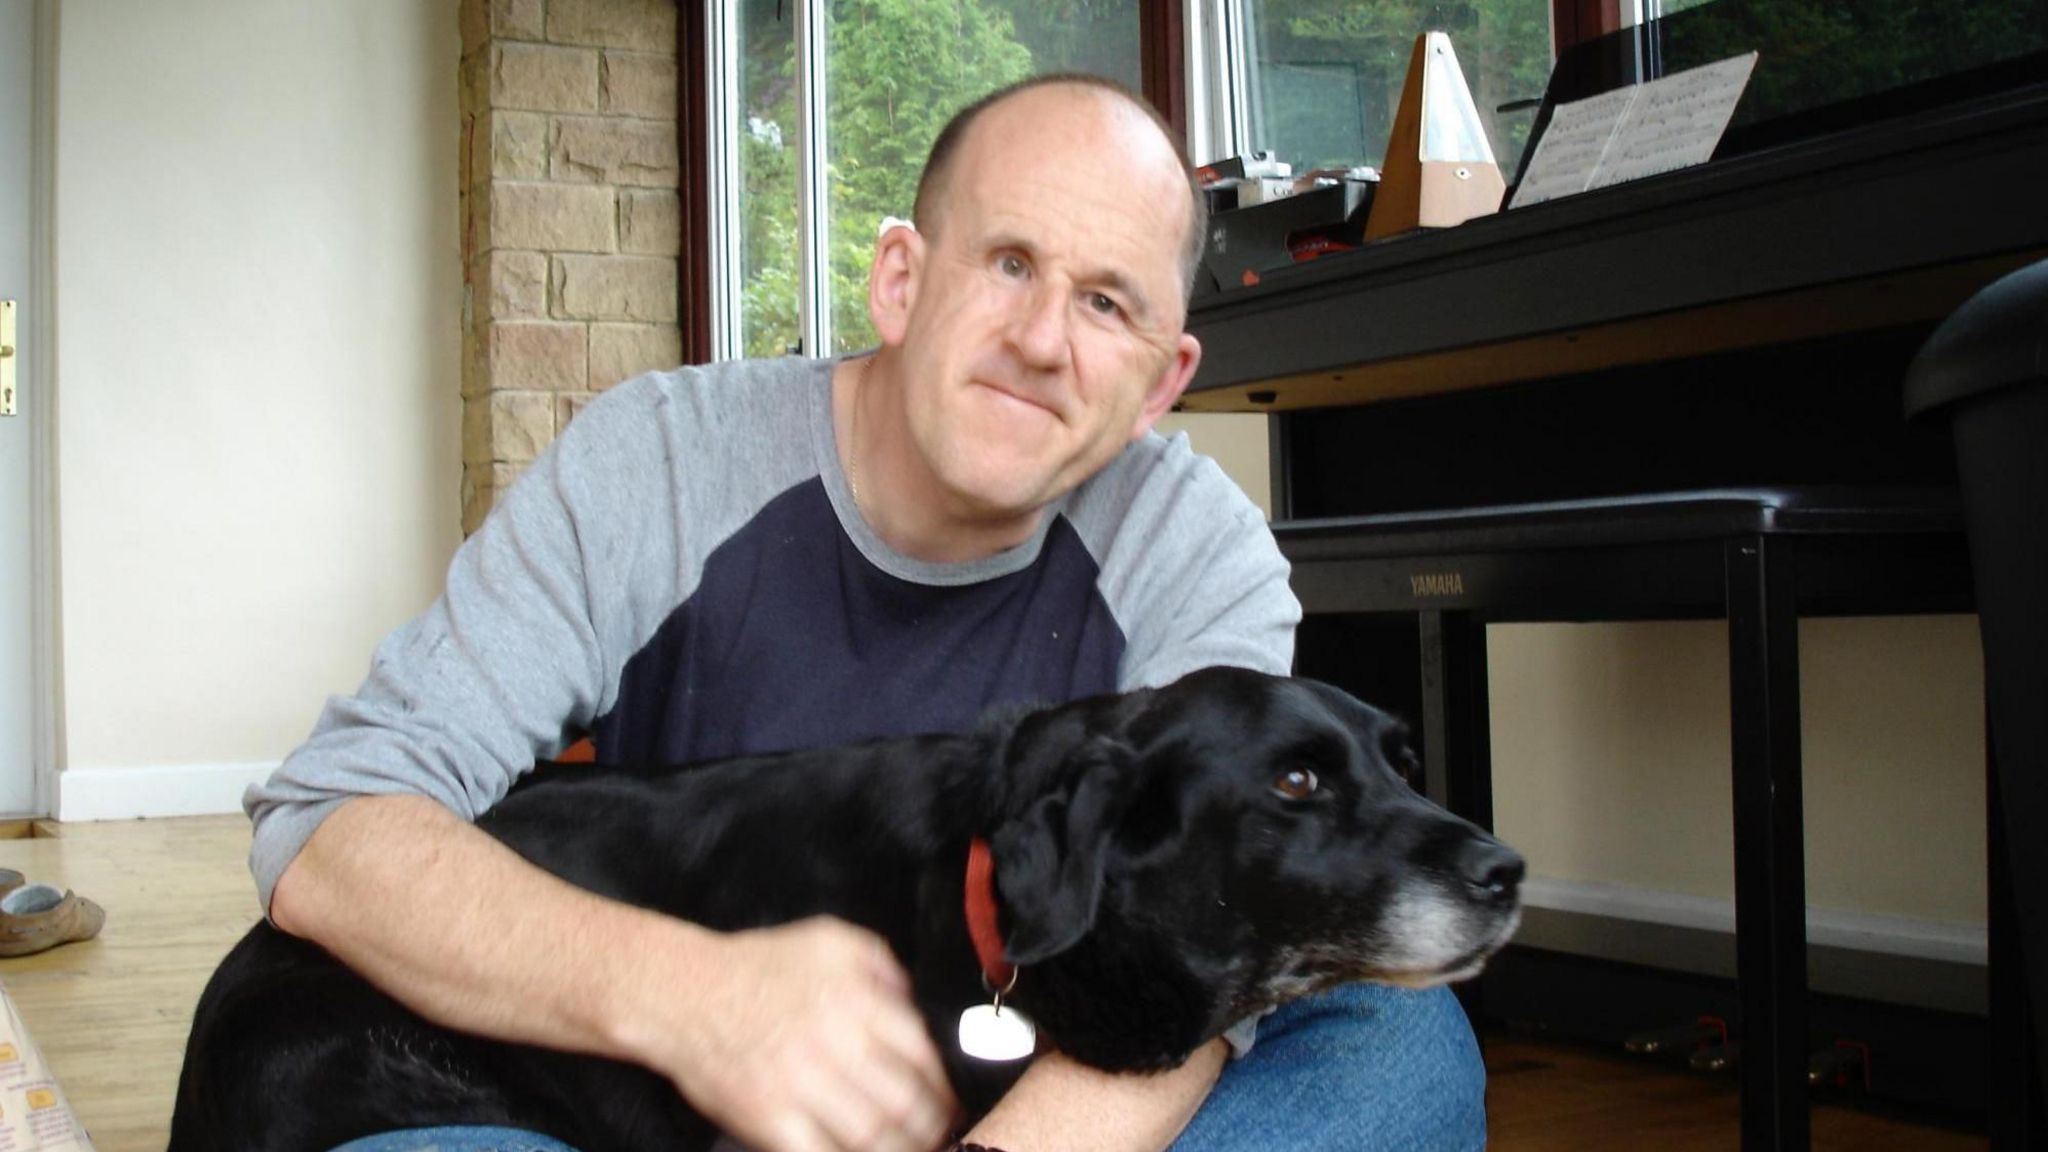 A middle aged man with cropped hair hugs a large black dog